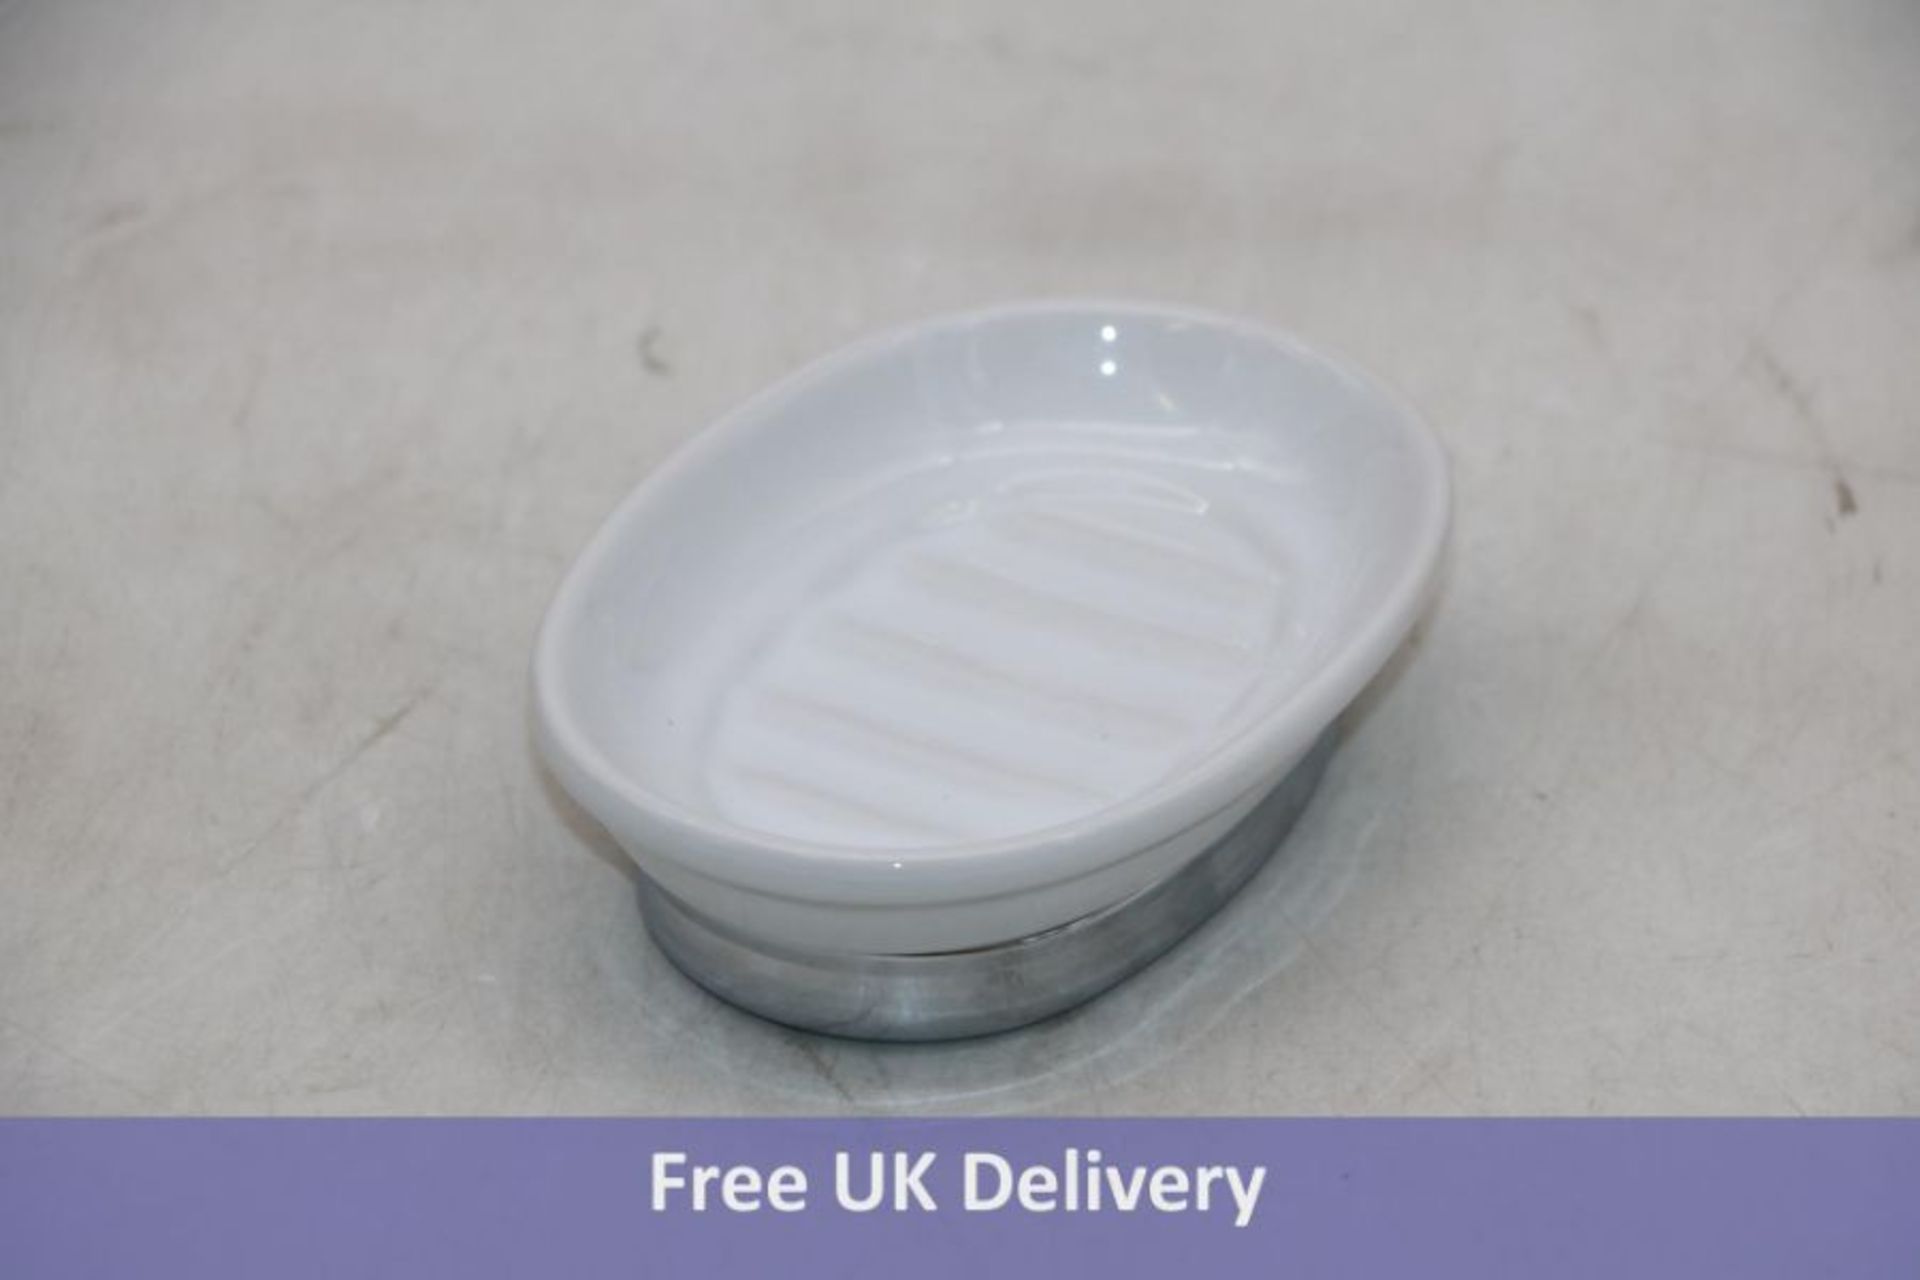 Twelve iDesign Soap Dish Holder, Oval Shaped Made of Ceramic and Metal